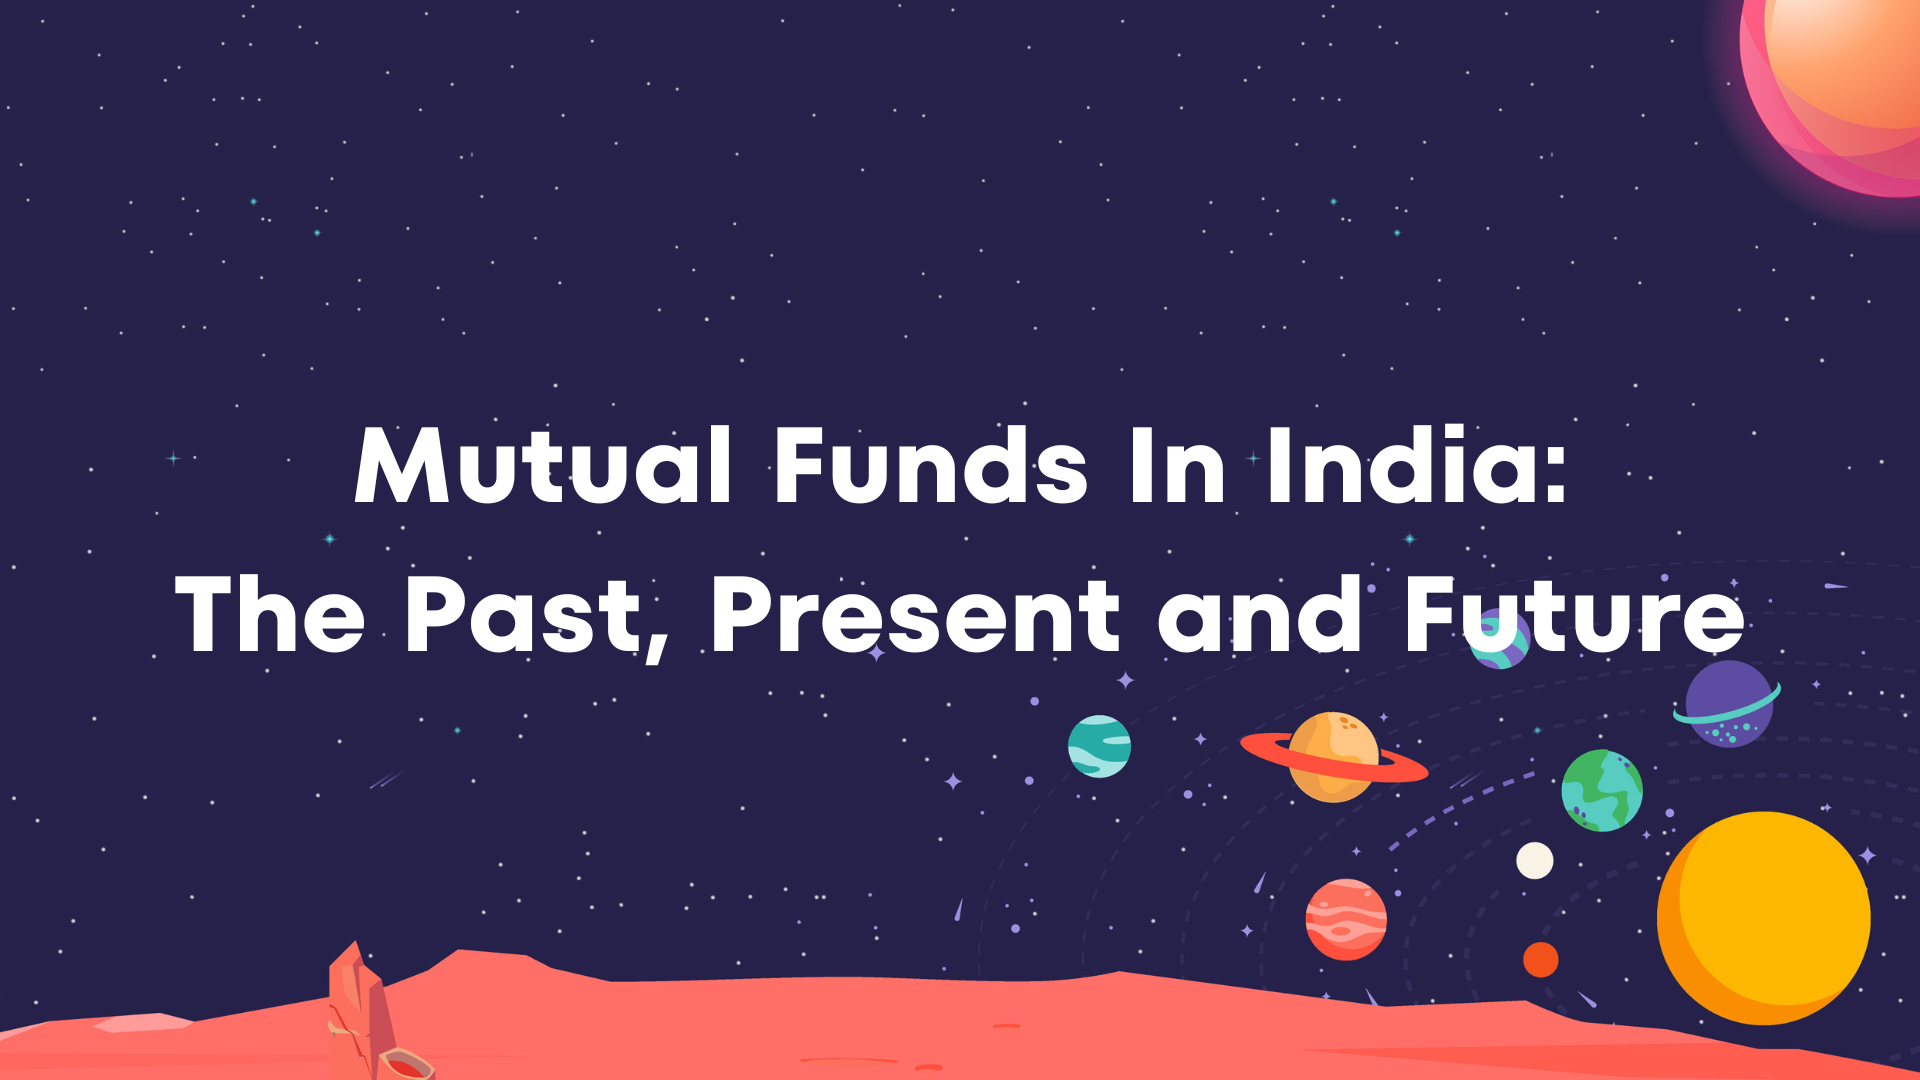 Mutual Funds in India: The Past, Present and Future